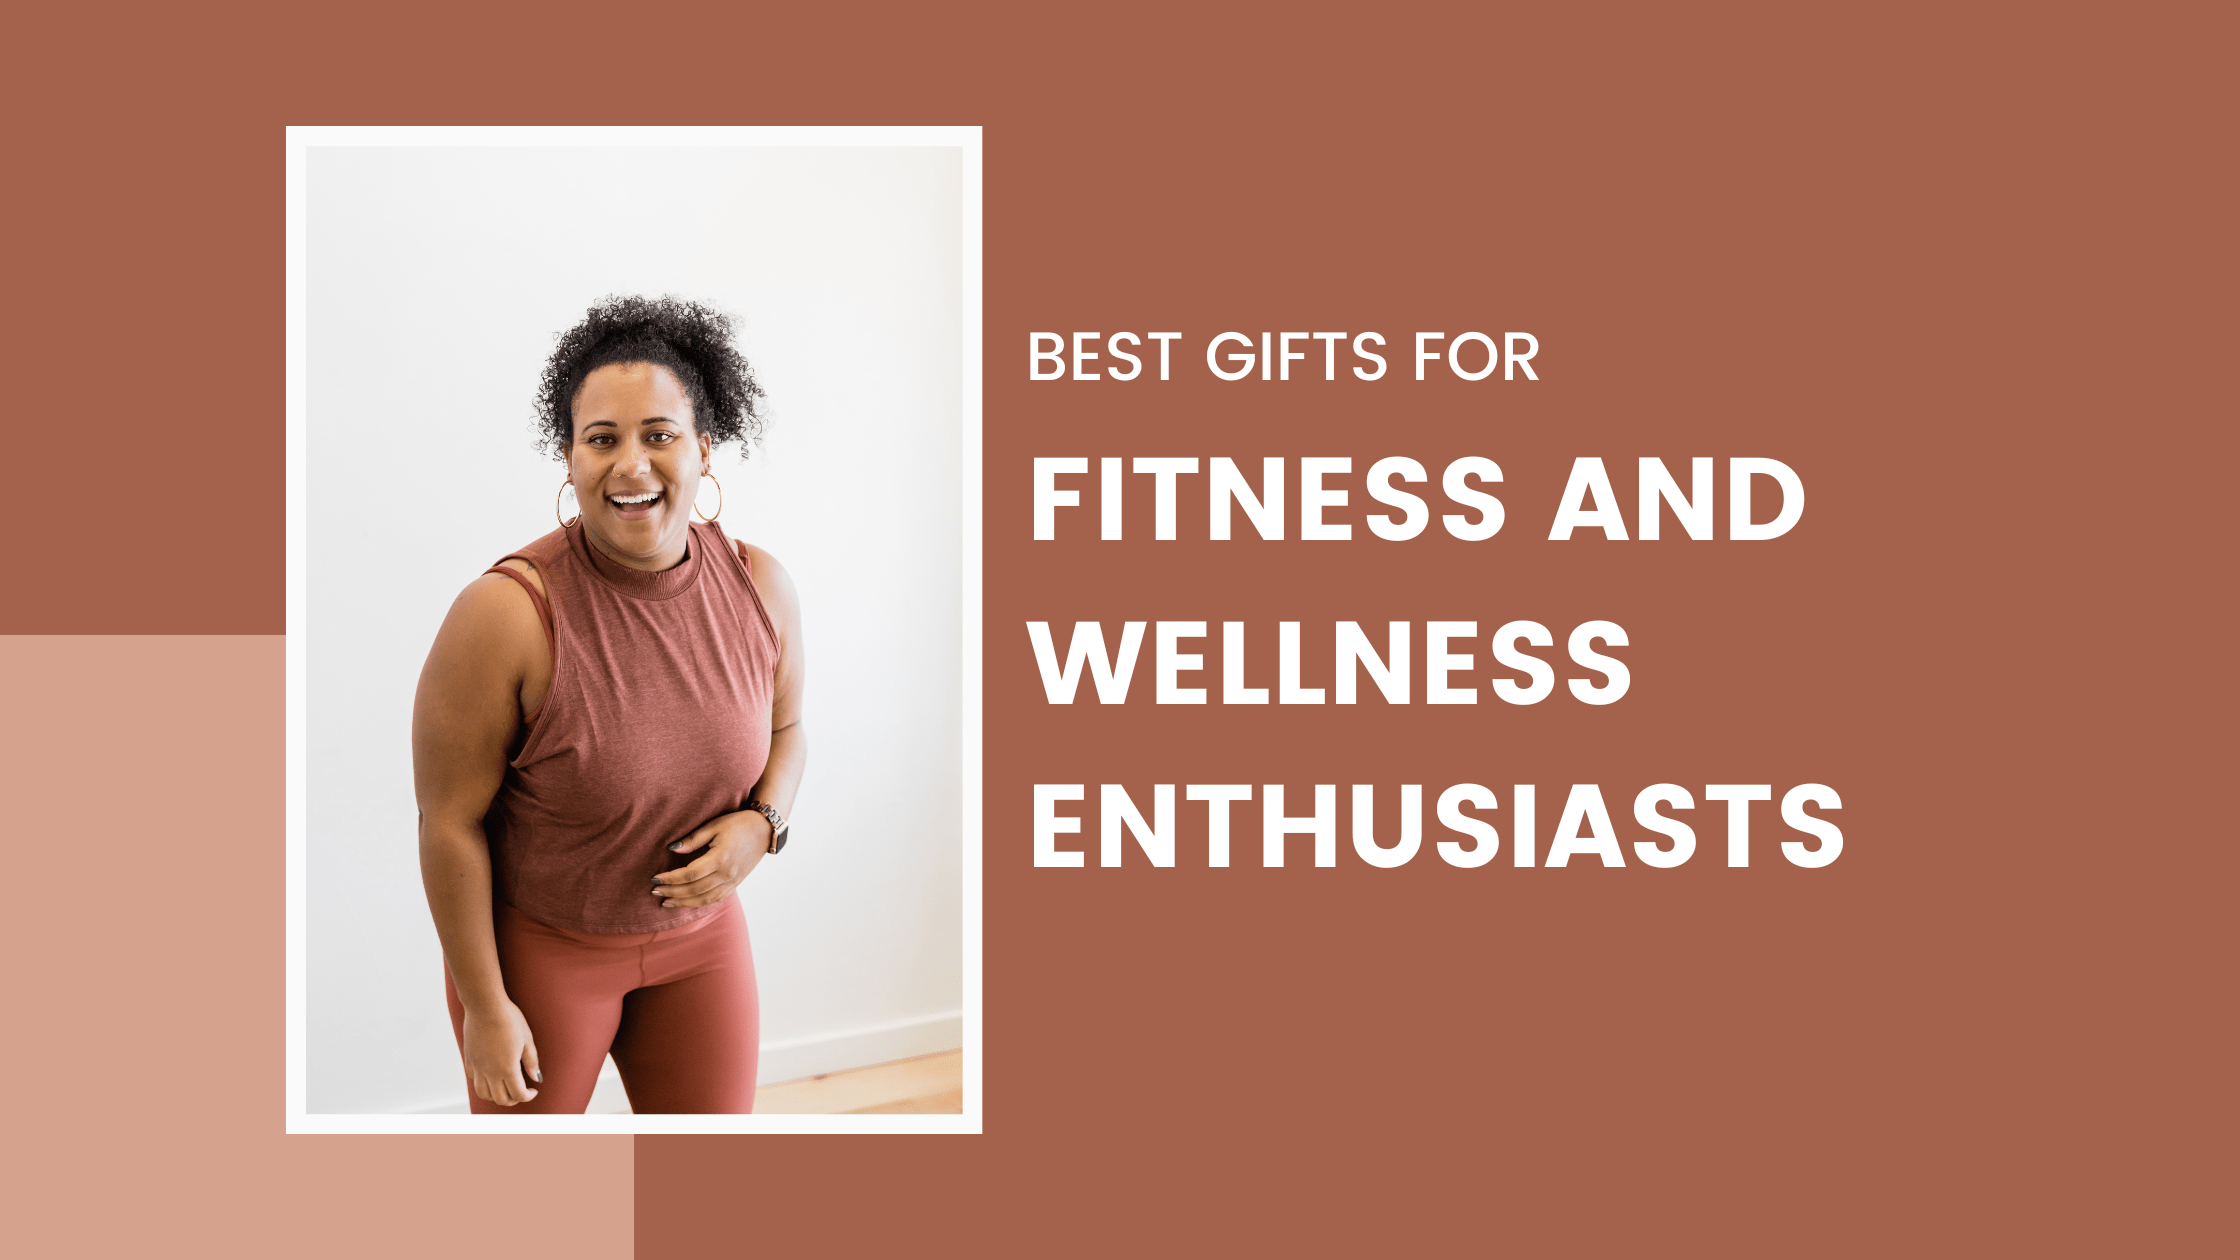 Best Gifts for Fitness and Wellness Enthusiasts